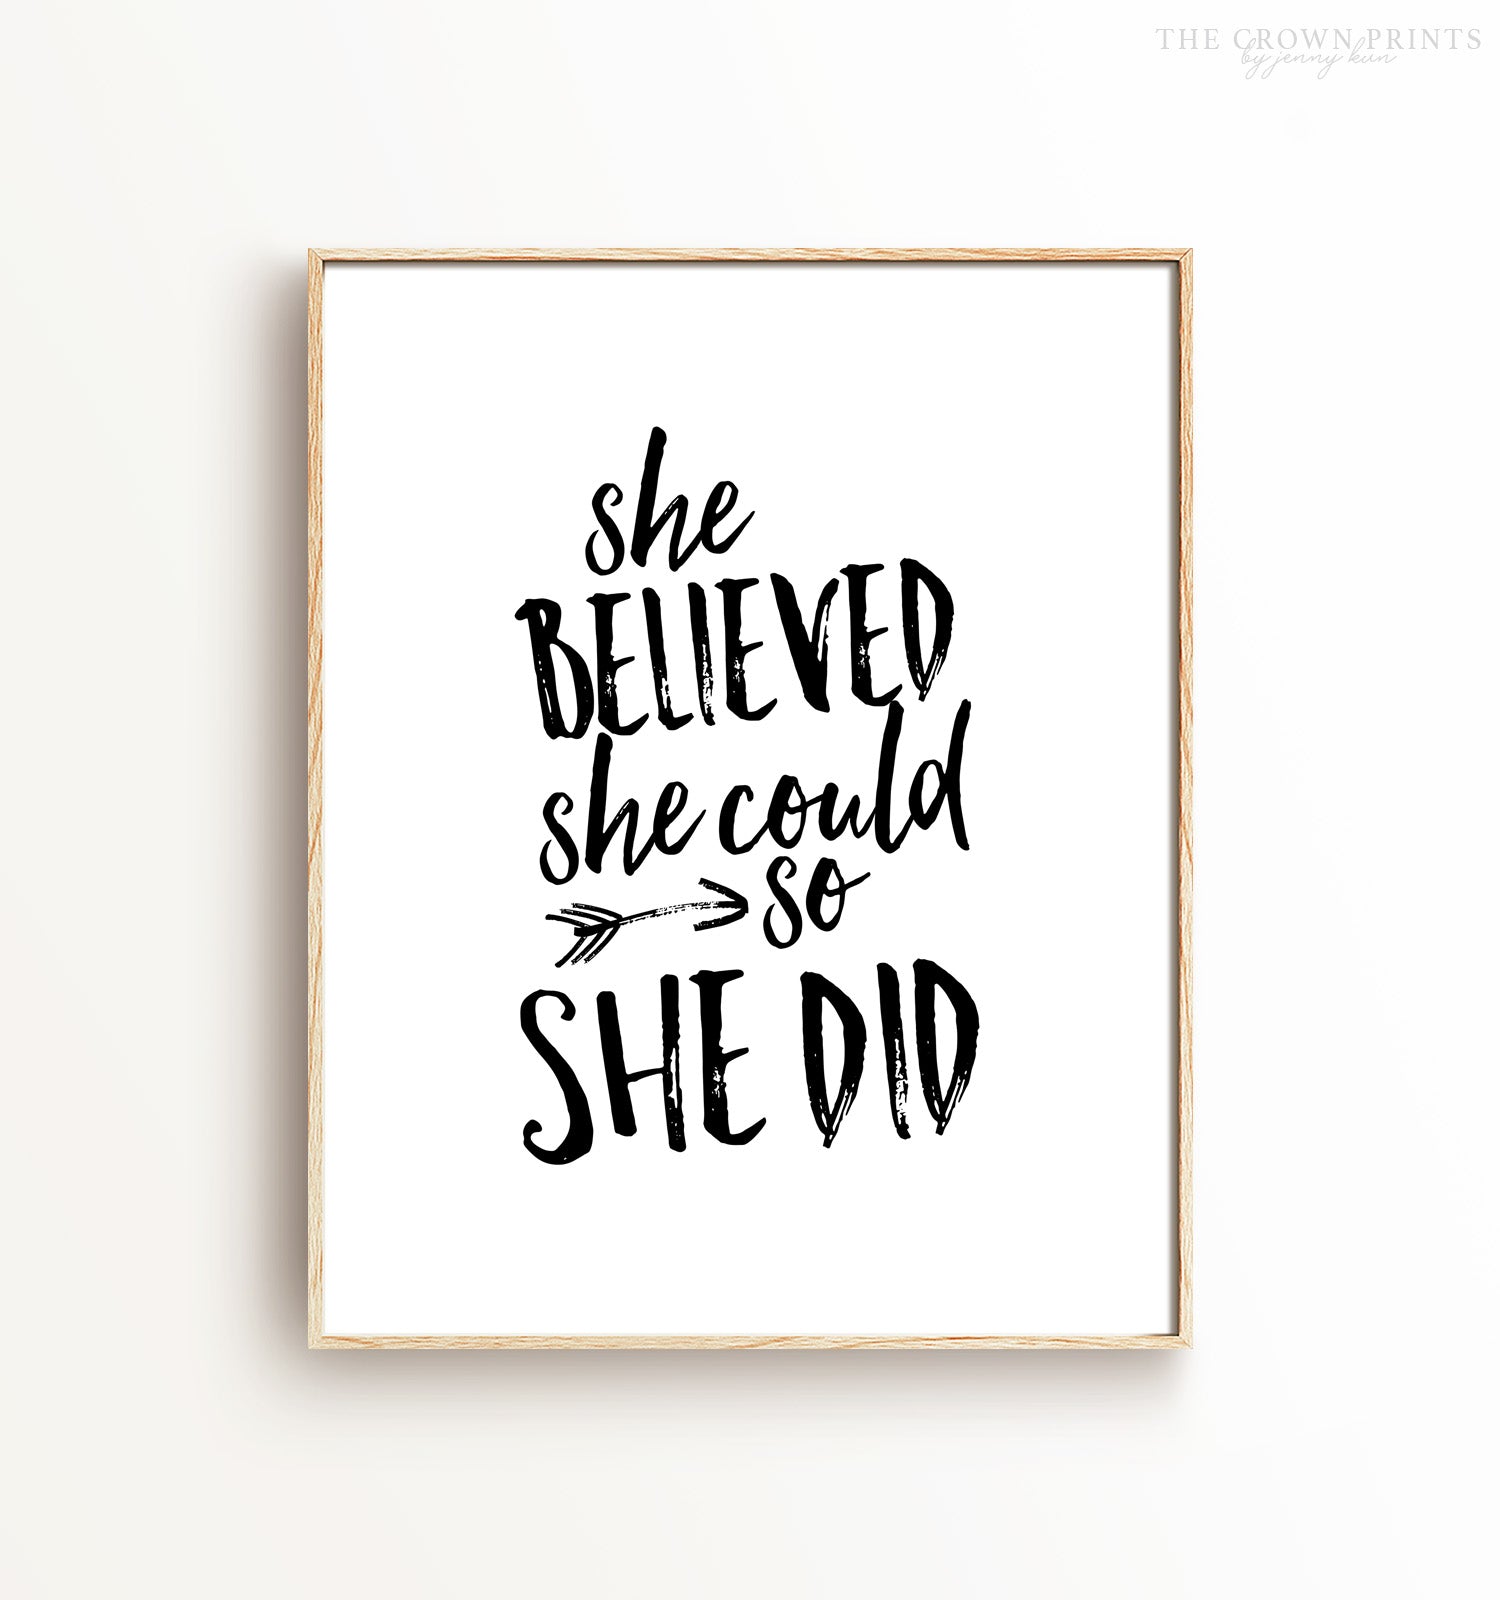 Nieuw She Believed She Could So She Did Print - The Crown Prints AP-47